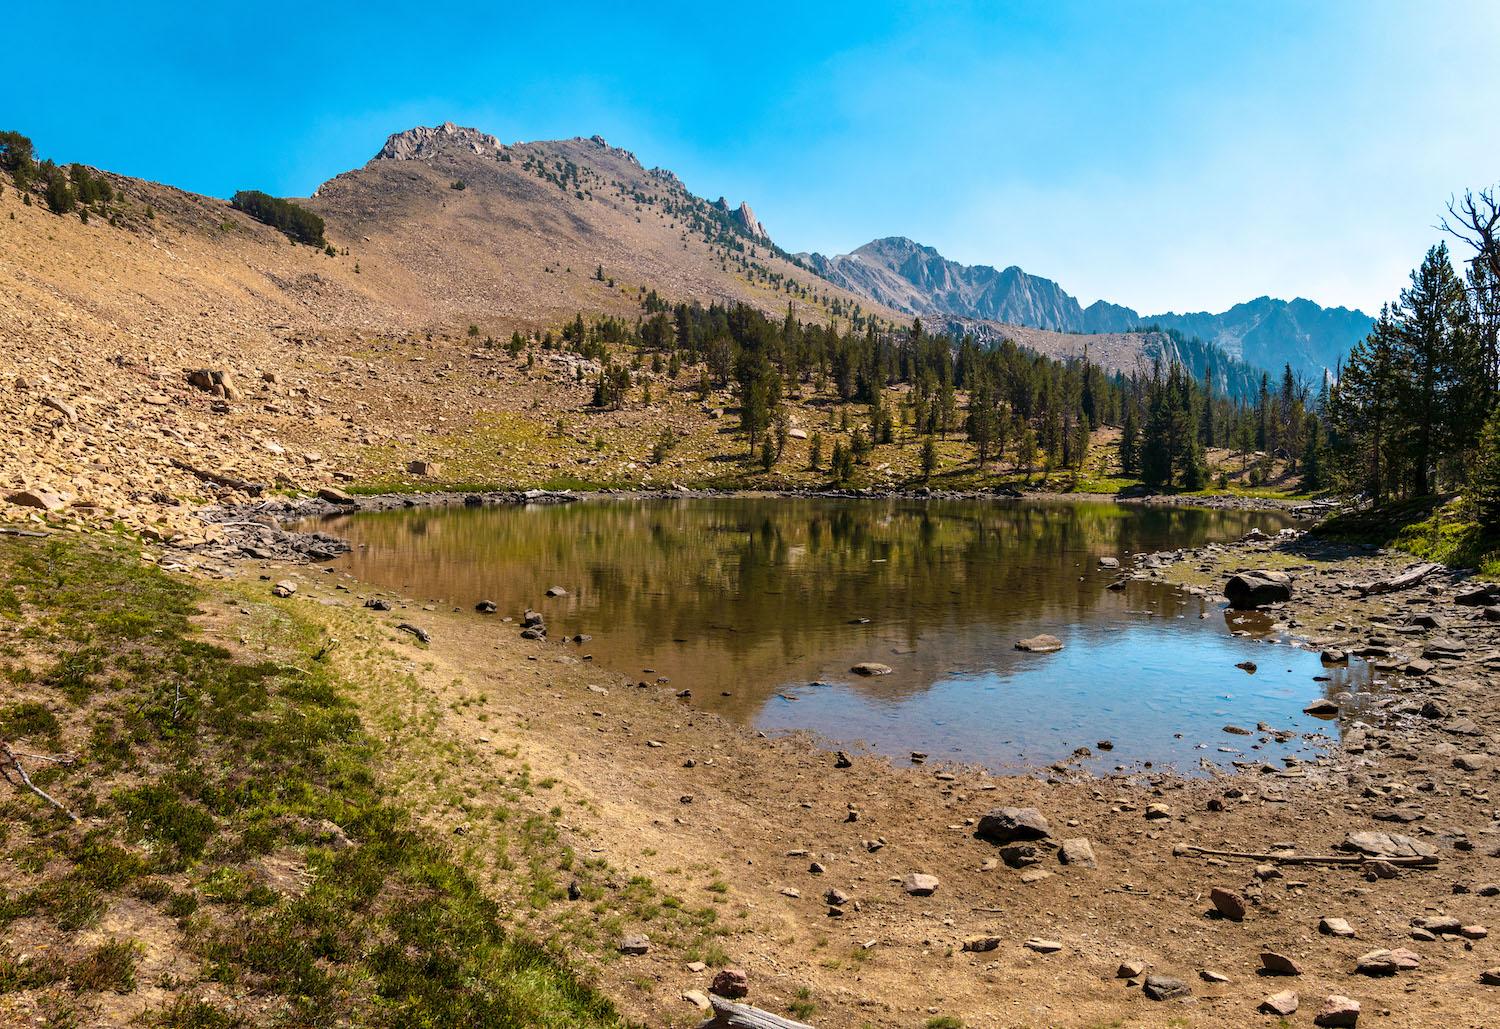 A trailside alpine tarn along the White Clouds Loop